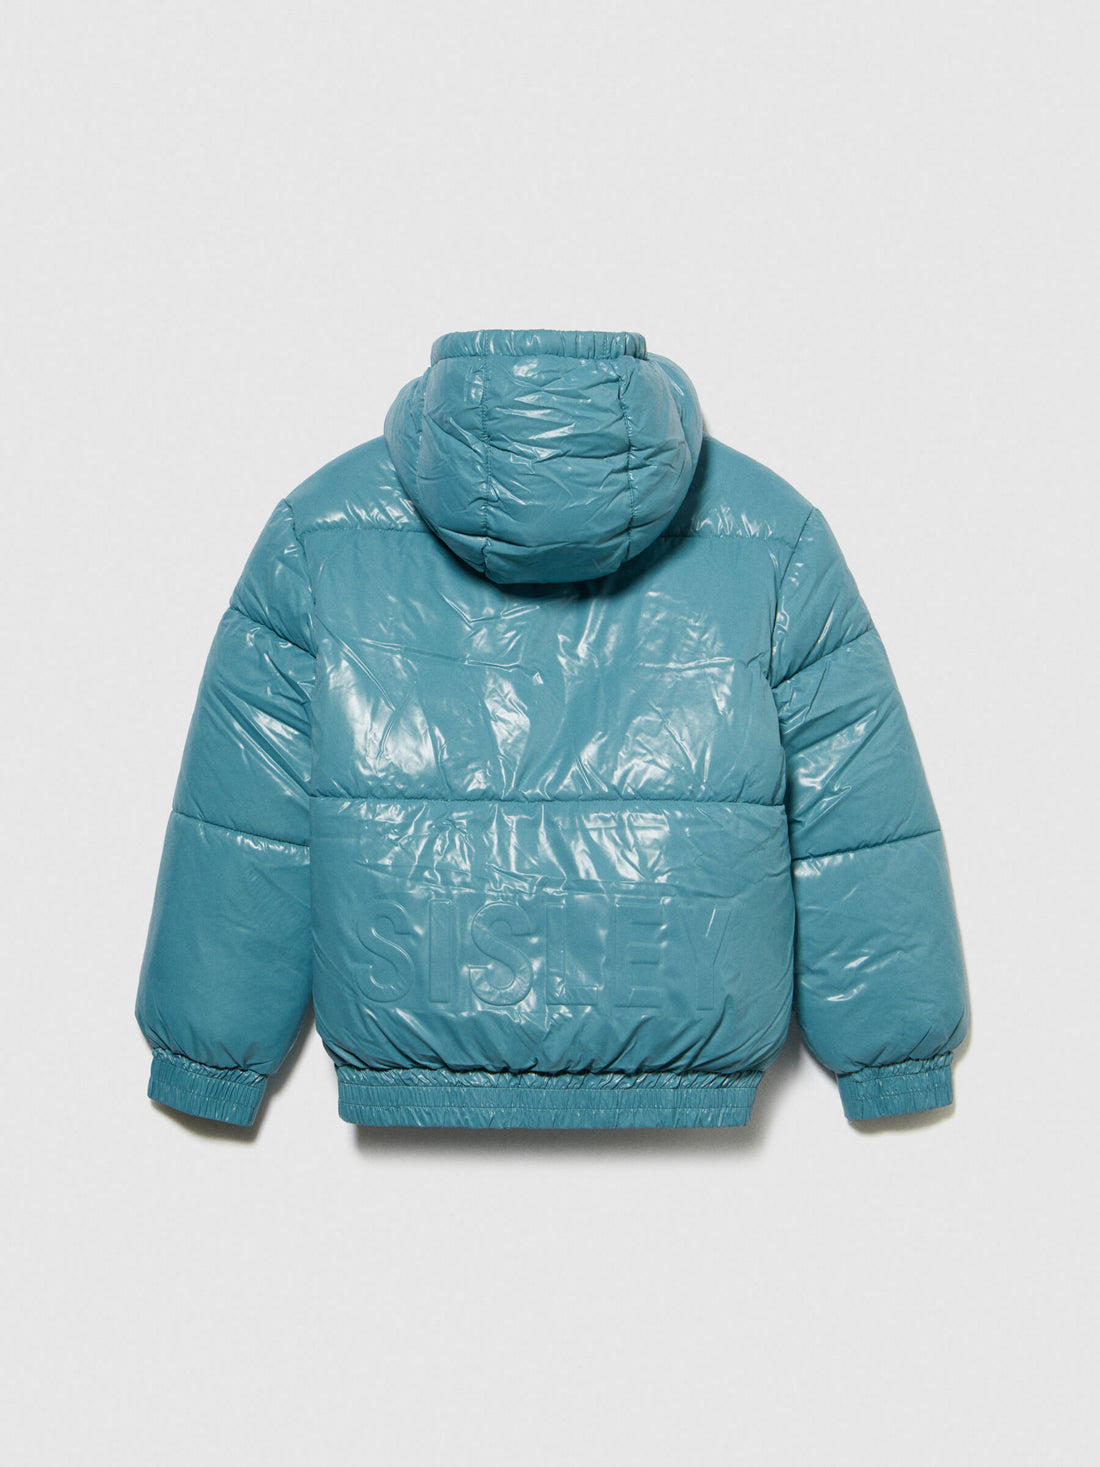 Padded Jacket With Embossed Print_2EO0YN00Q_2H6_02